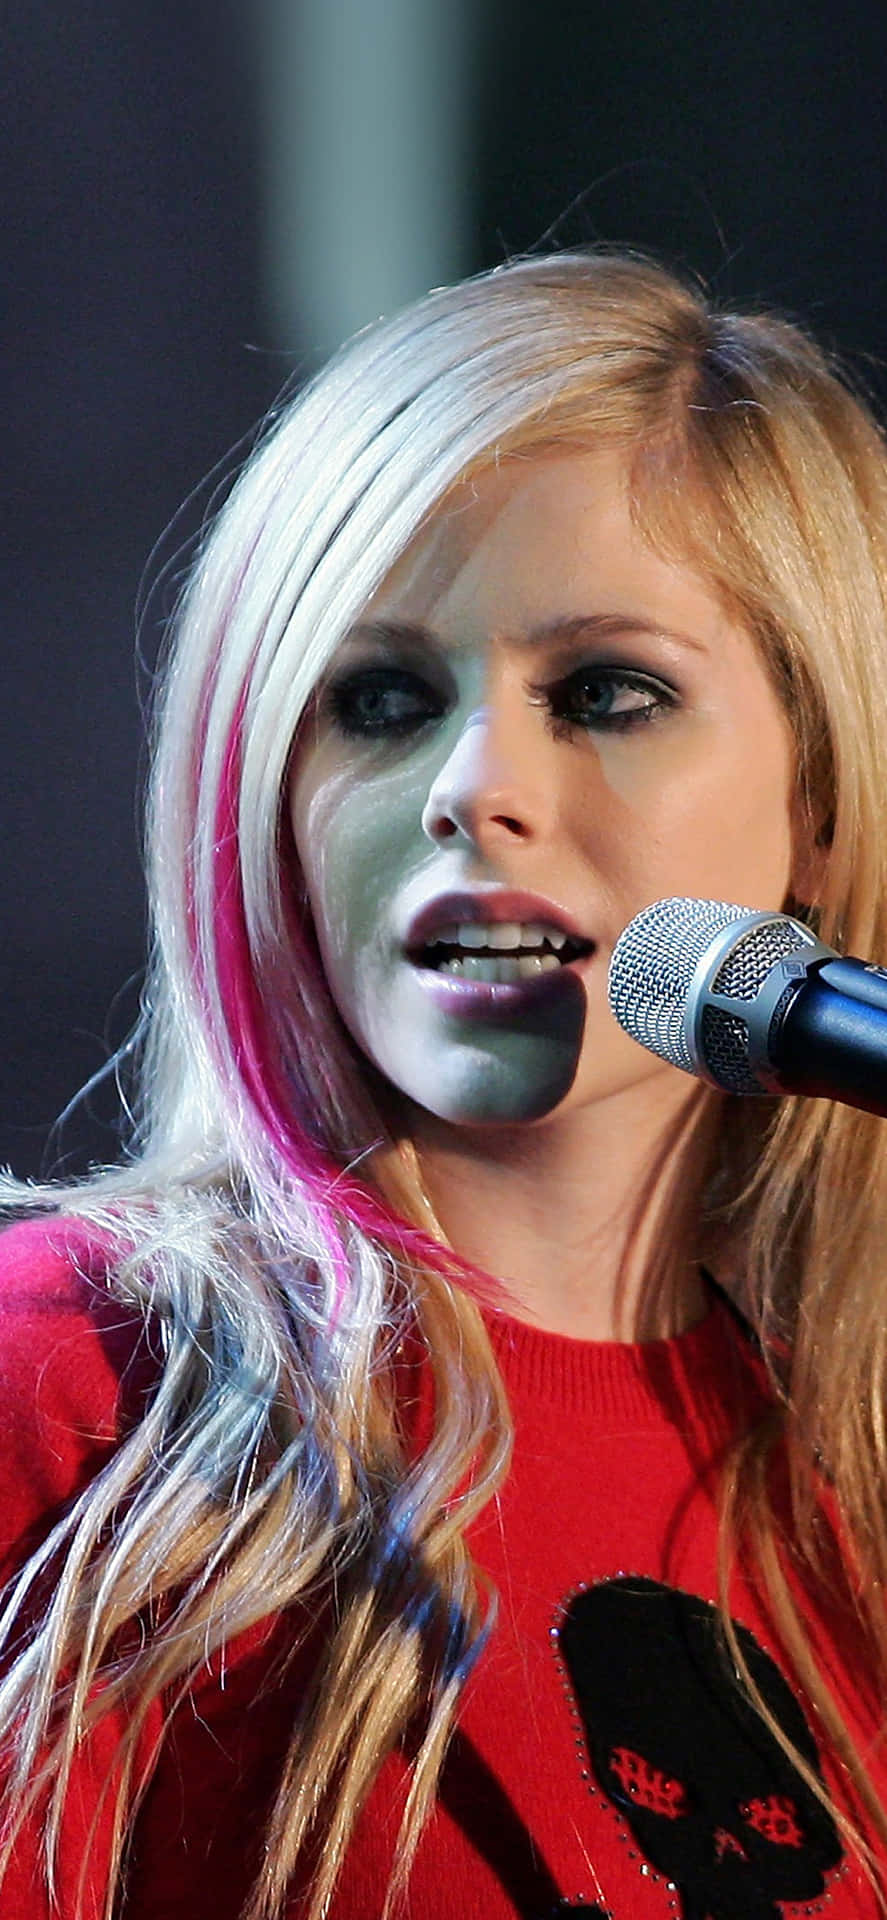 Avril Lavigne performing on stage